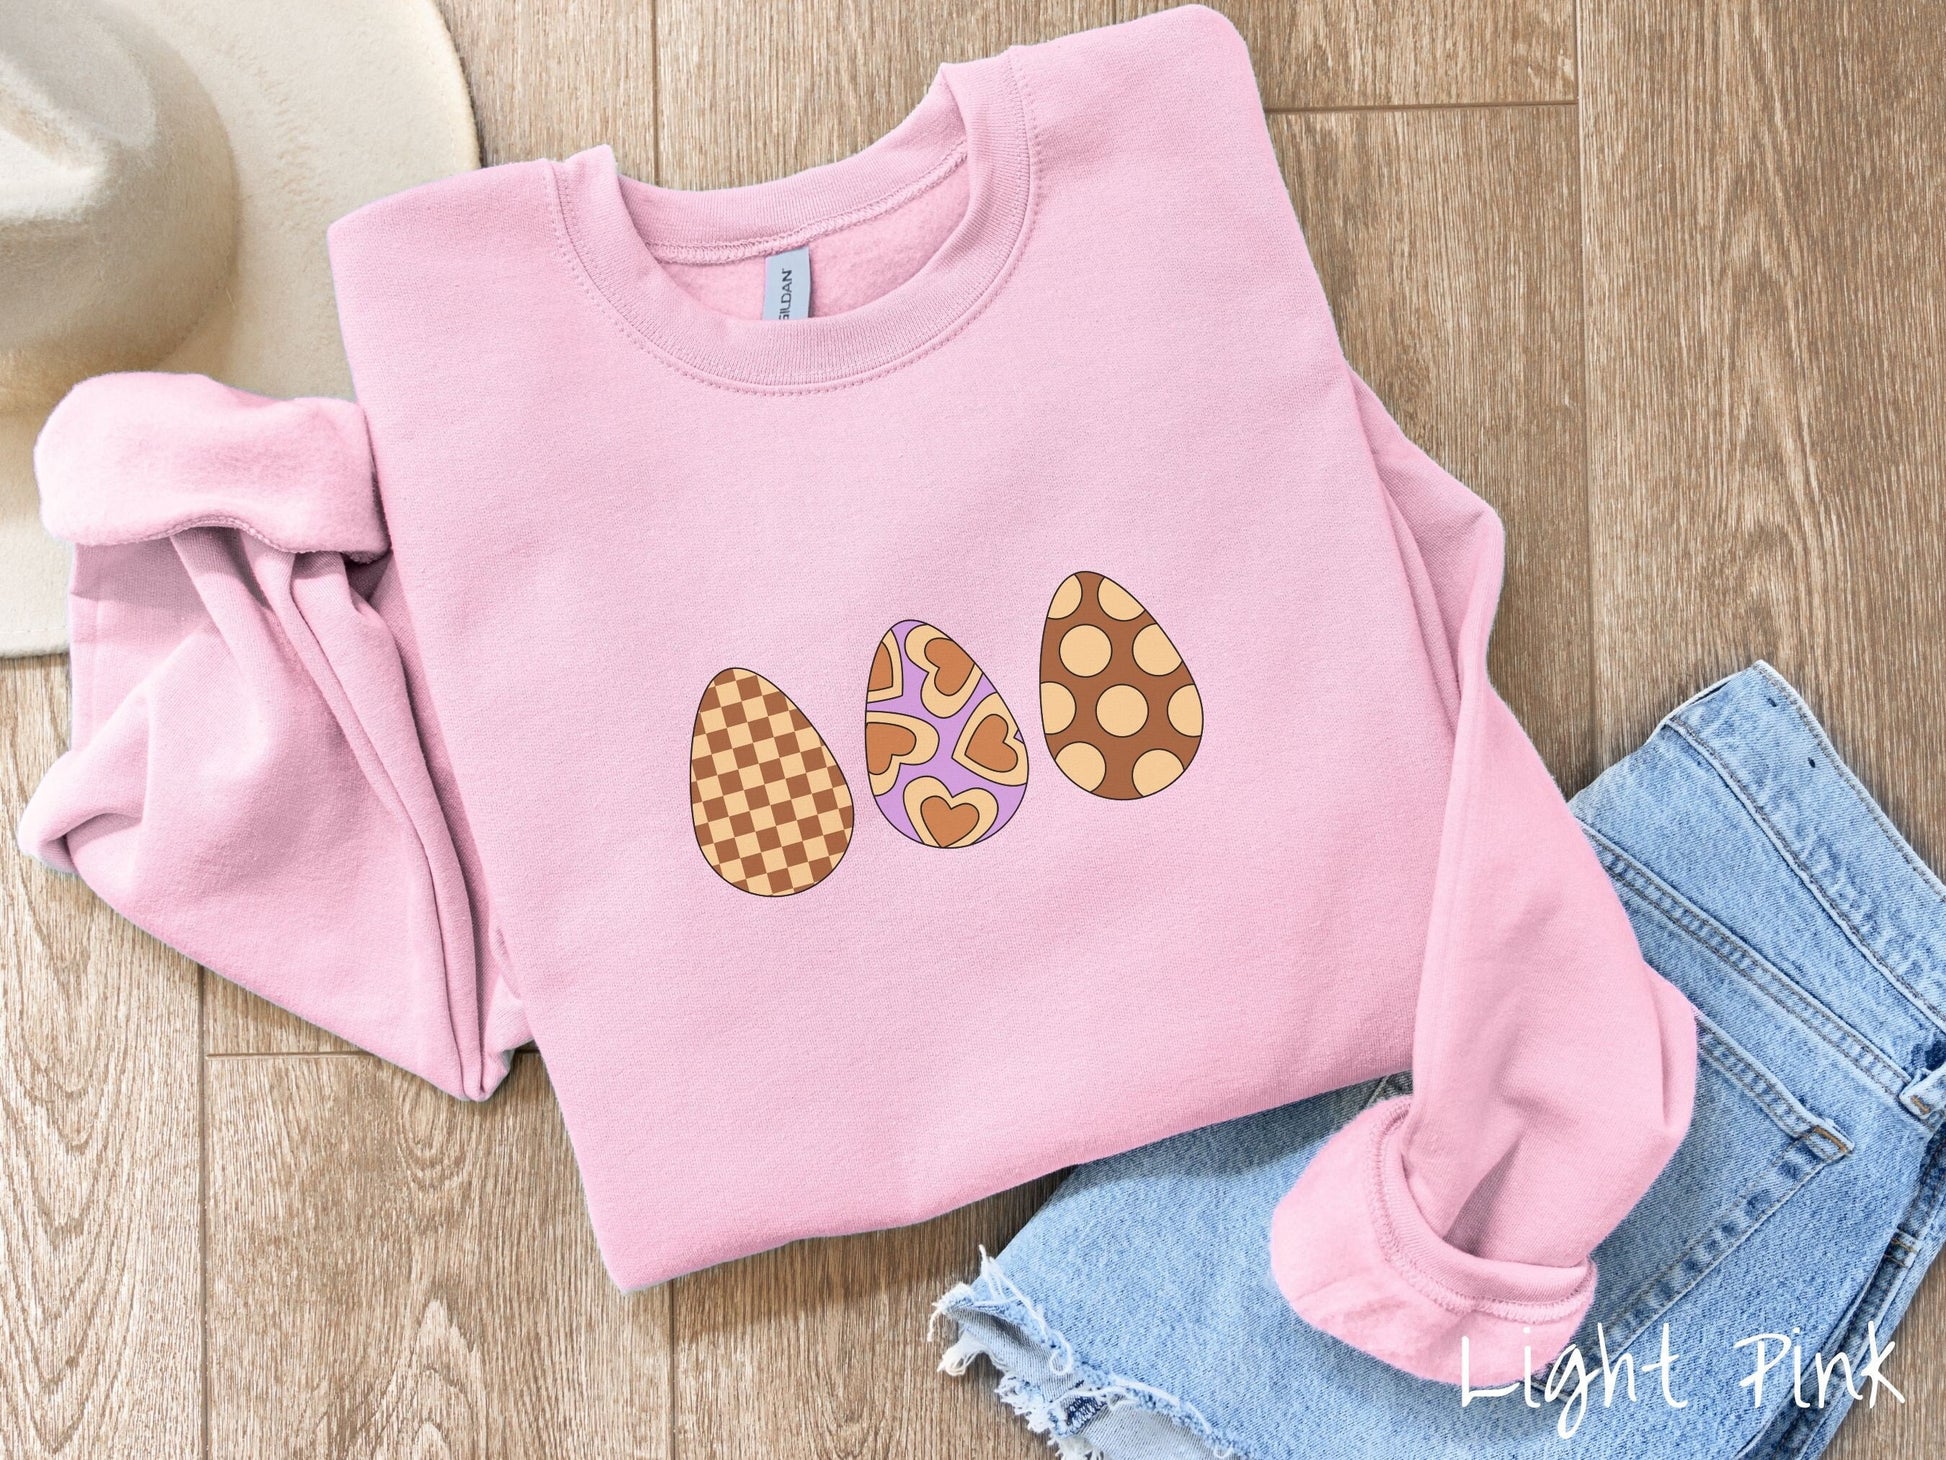 A woman wearing a cute, vintage light pink colored sweatshirt with three Easter eggs. The left has a light yellow and brown checkerboard pattern, the middle is purple with light yellow brown hearts, and the right is brown with light yellow circles.